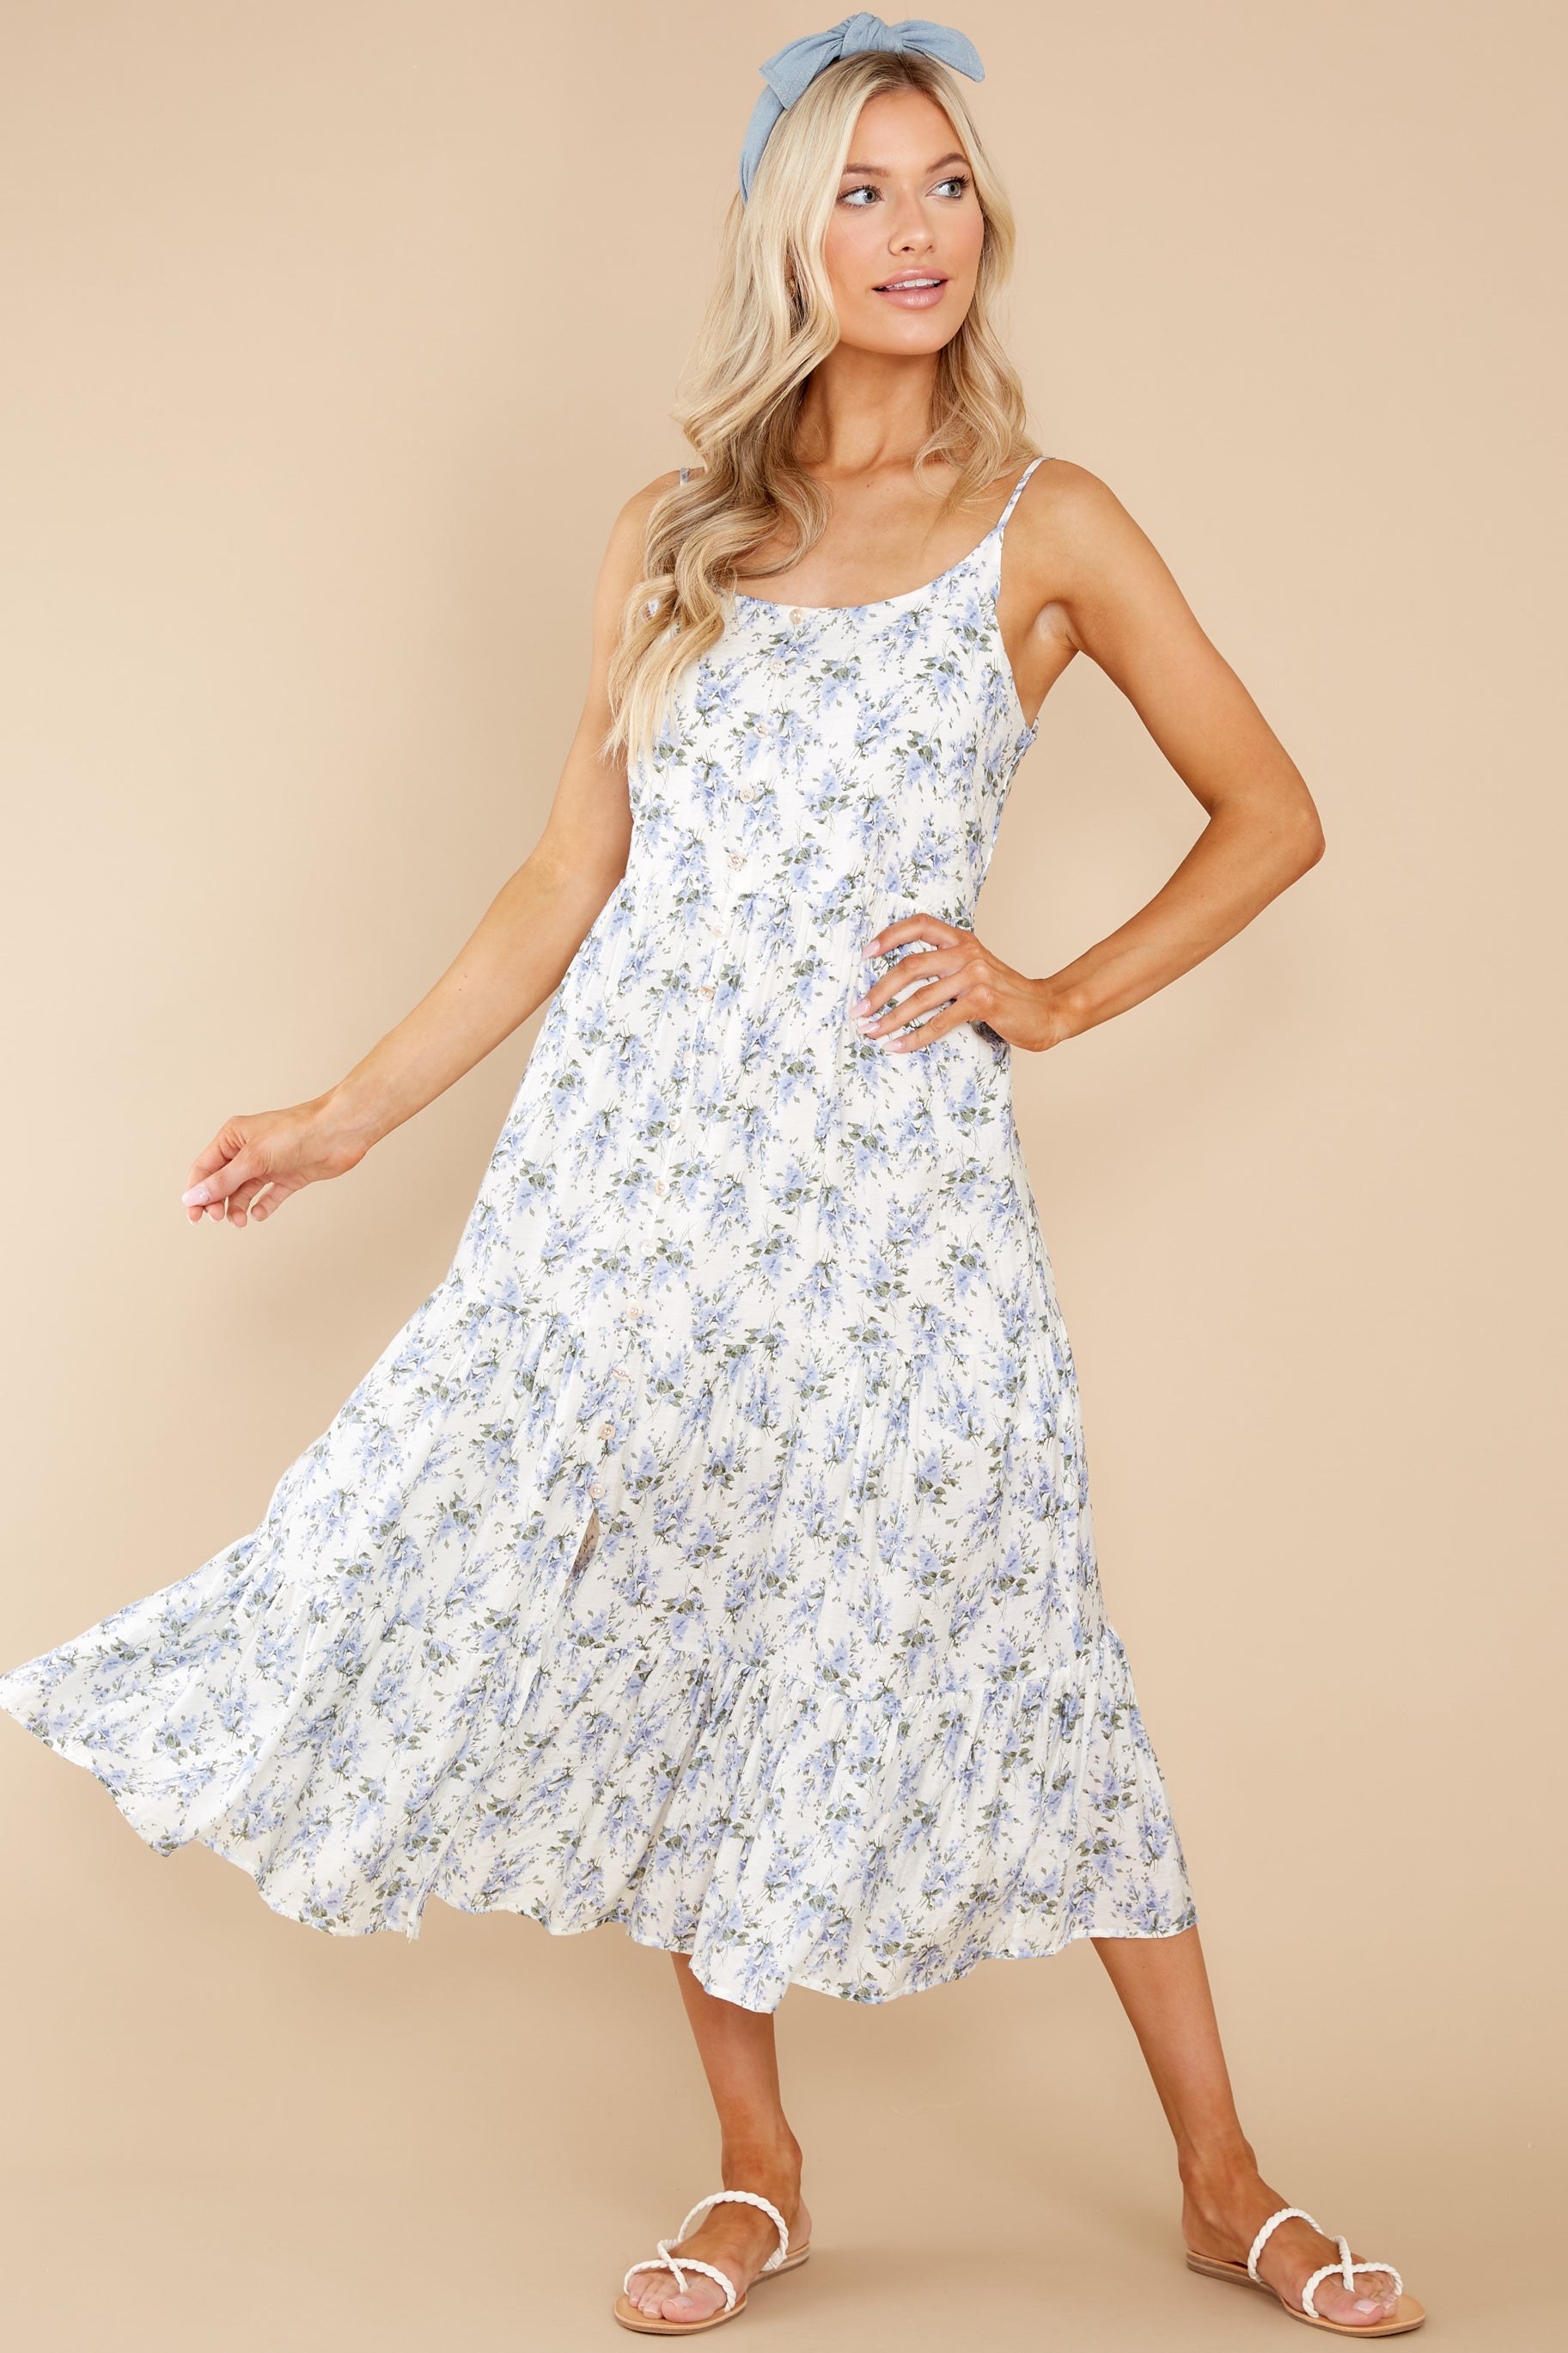 6 New Opportunity Blue And White Floral Print Midi Dress at reddress.com